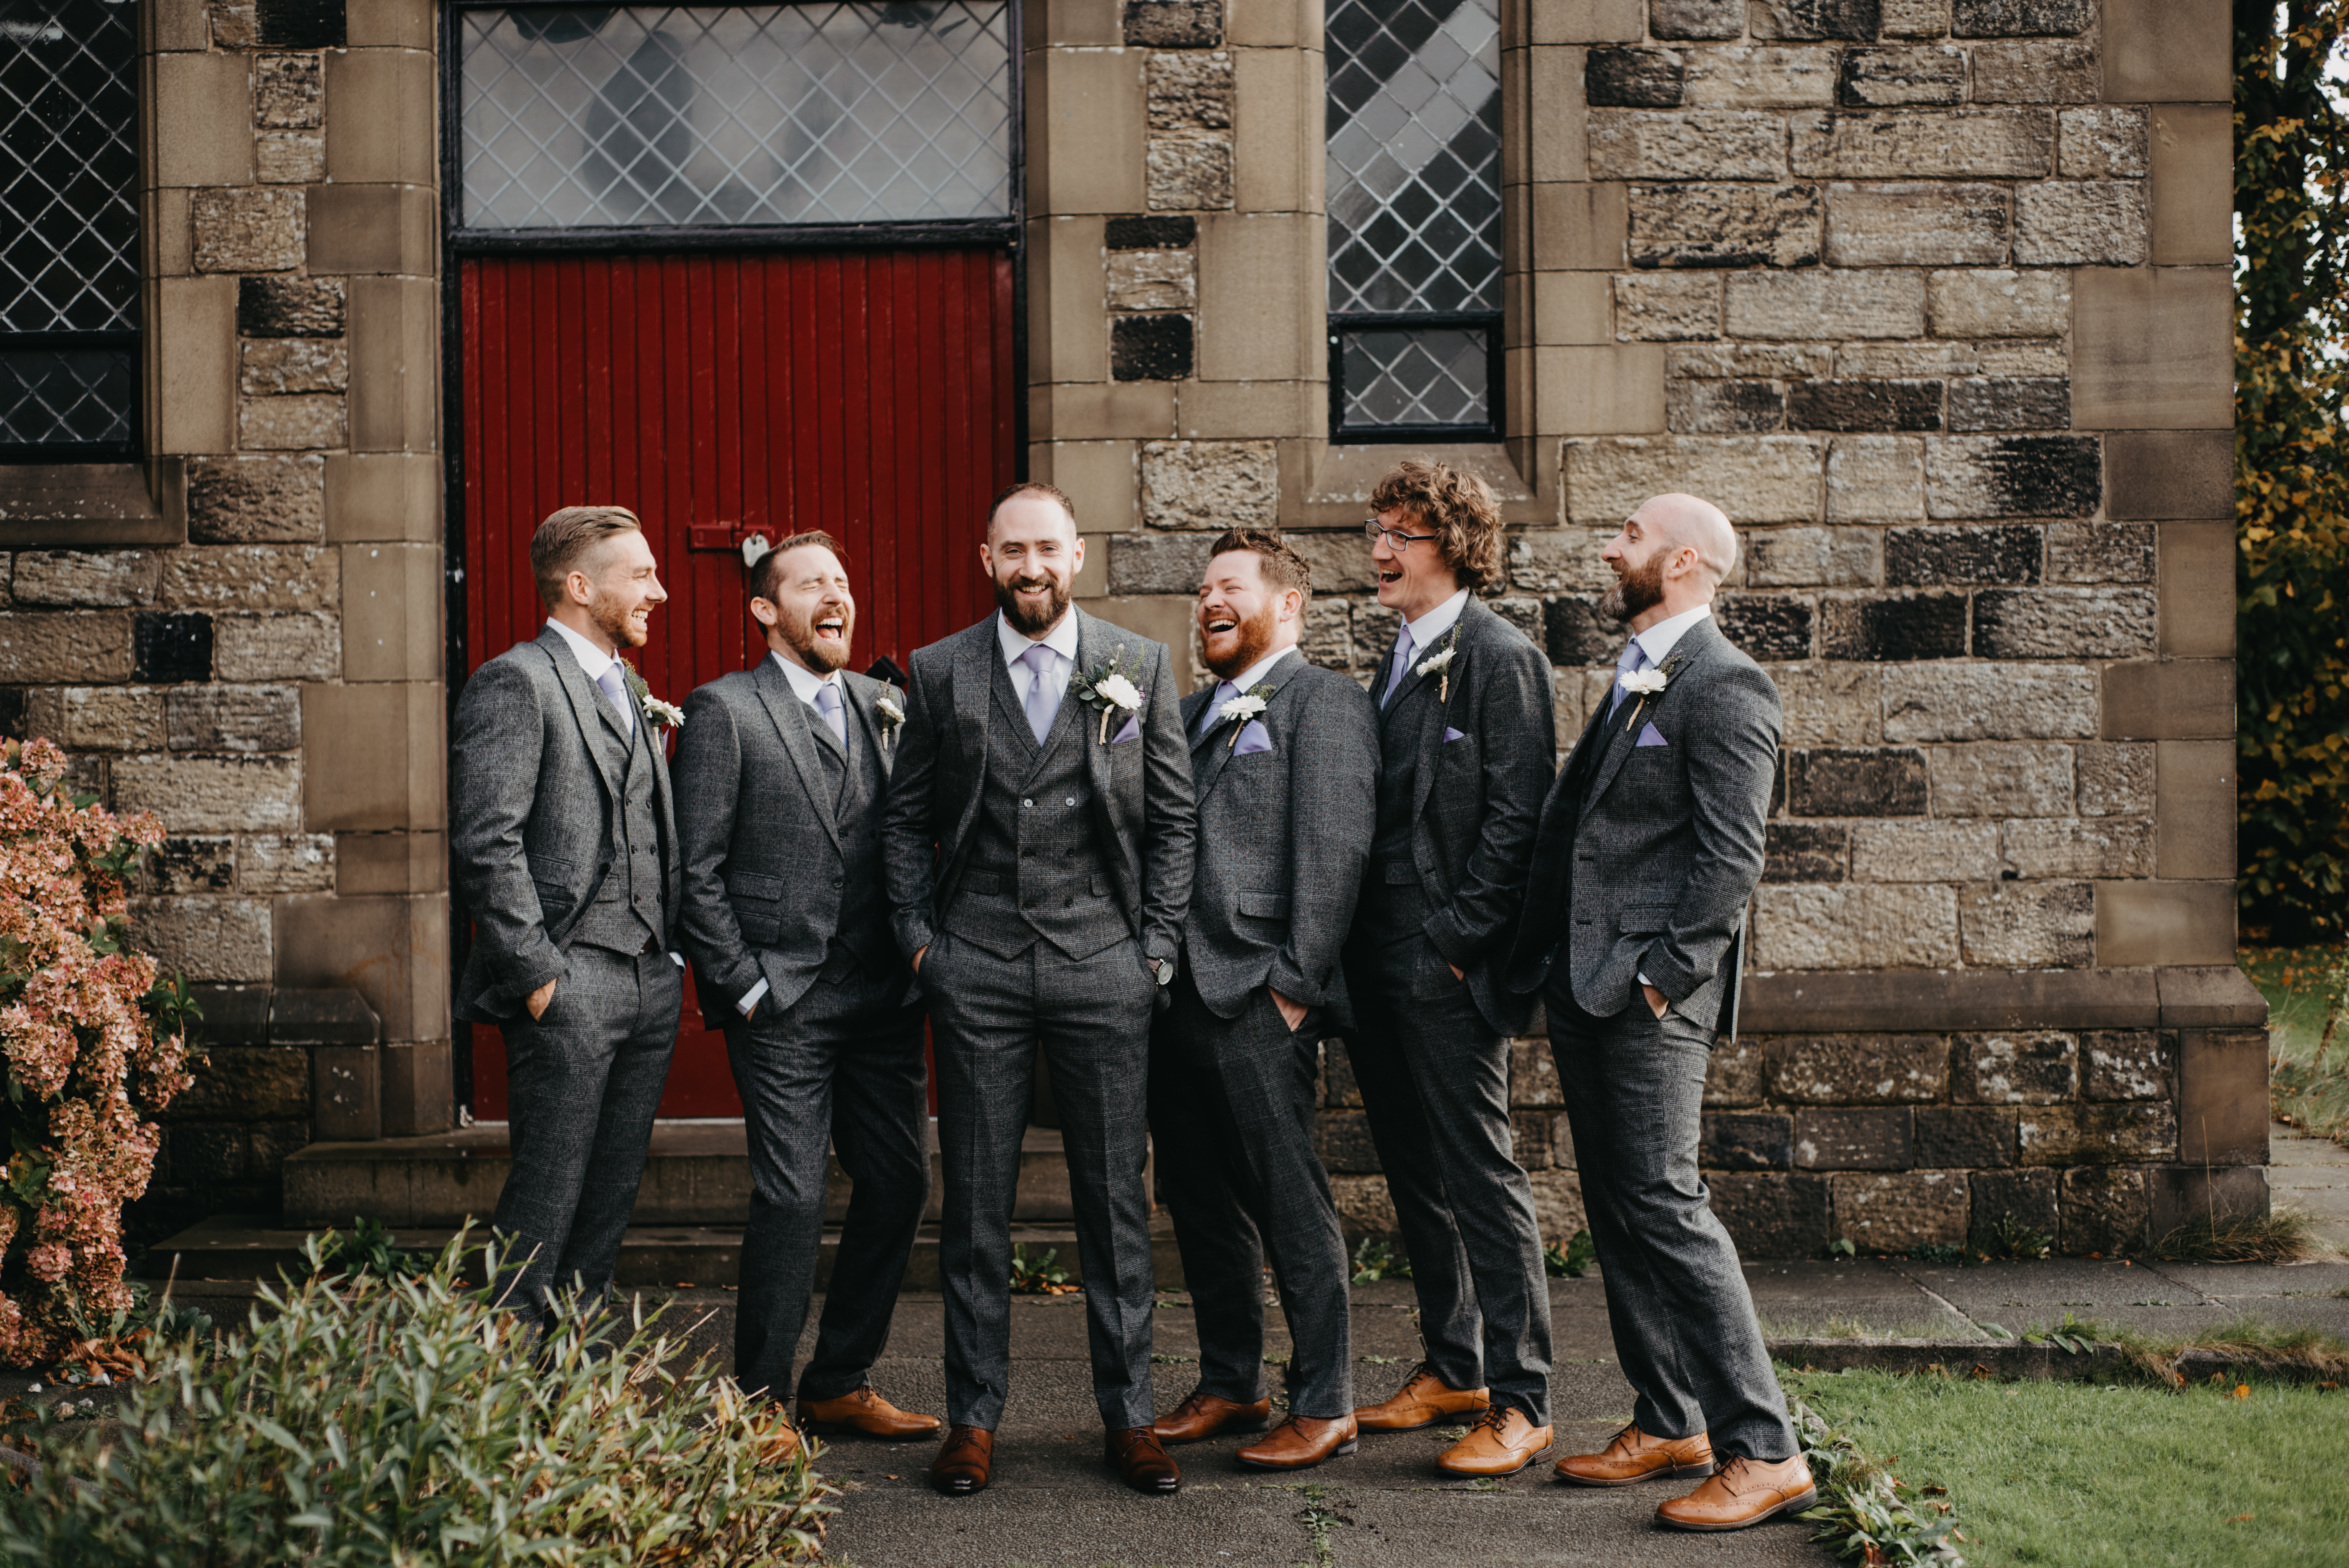 A groom and his groomsmen laughing